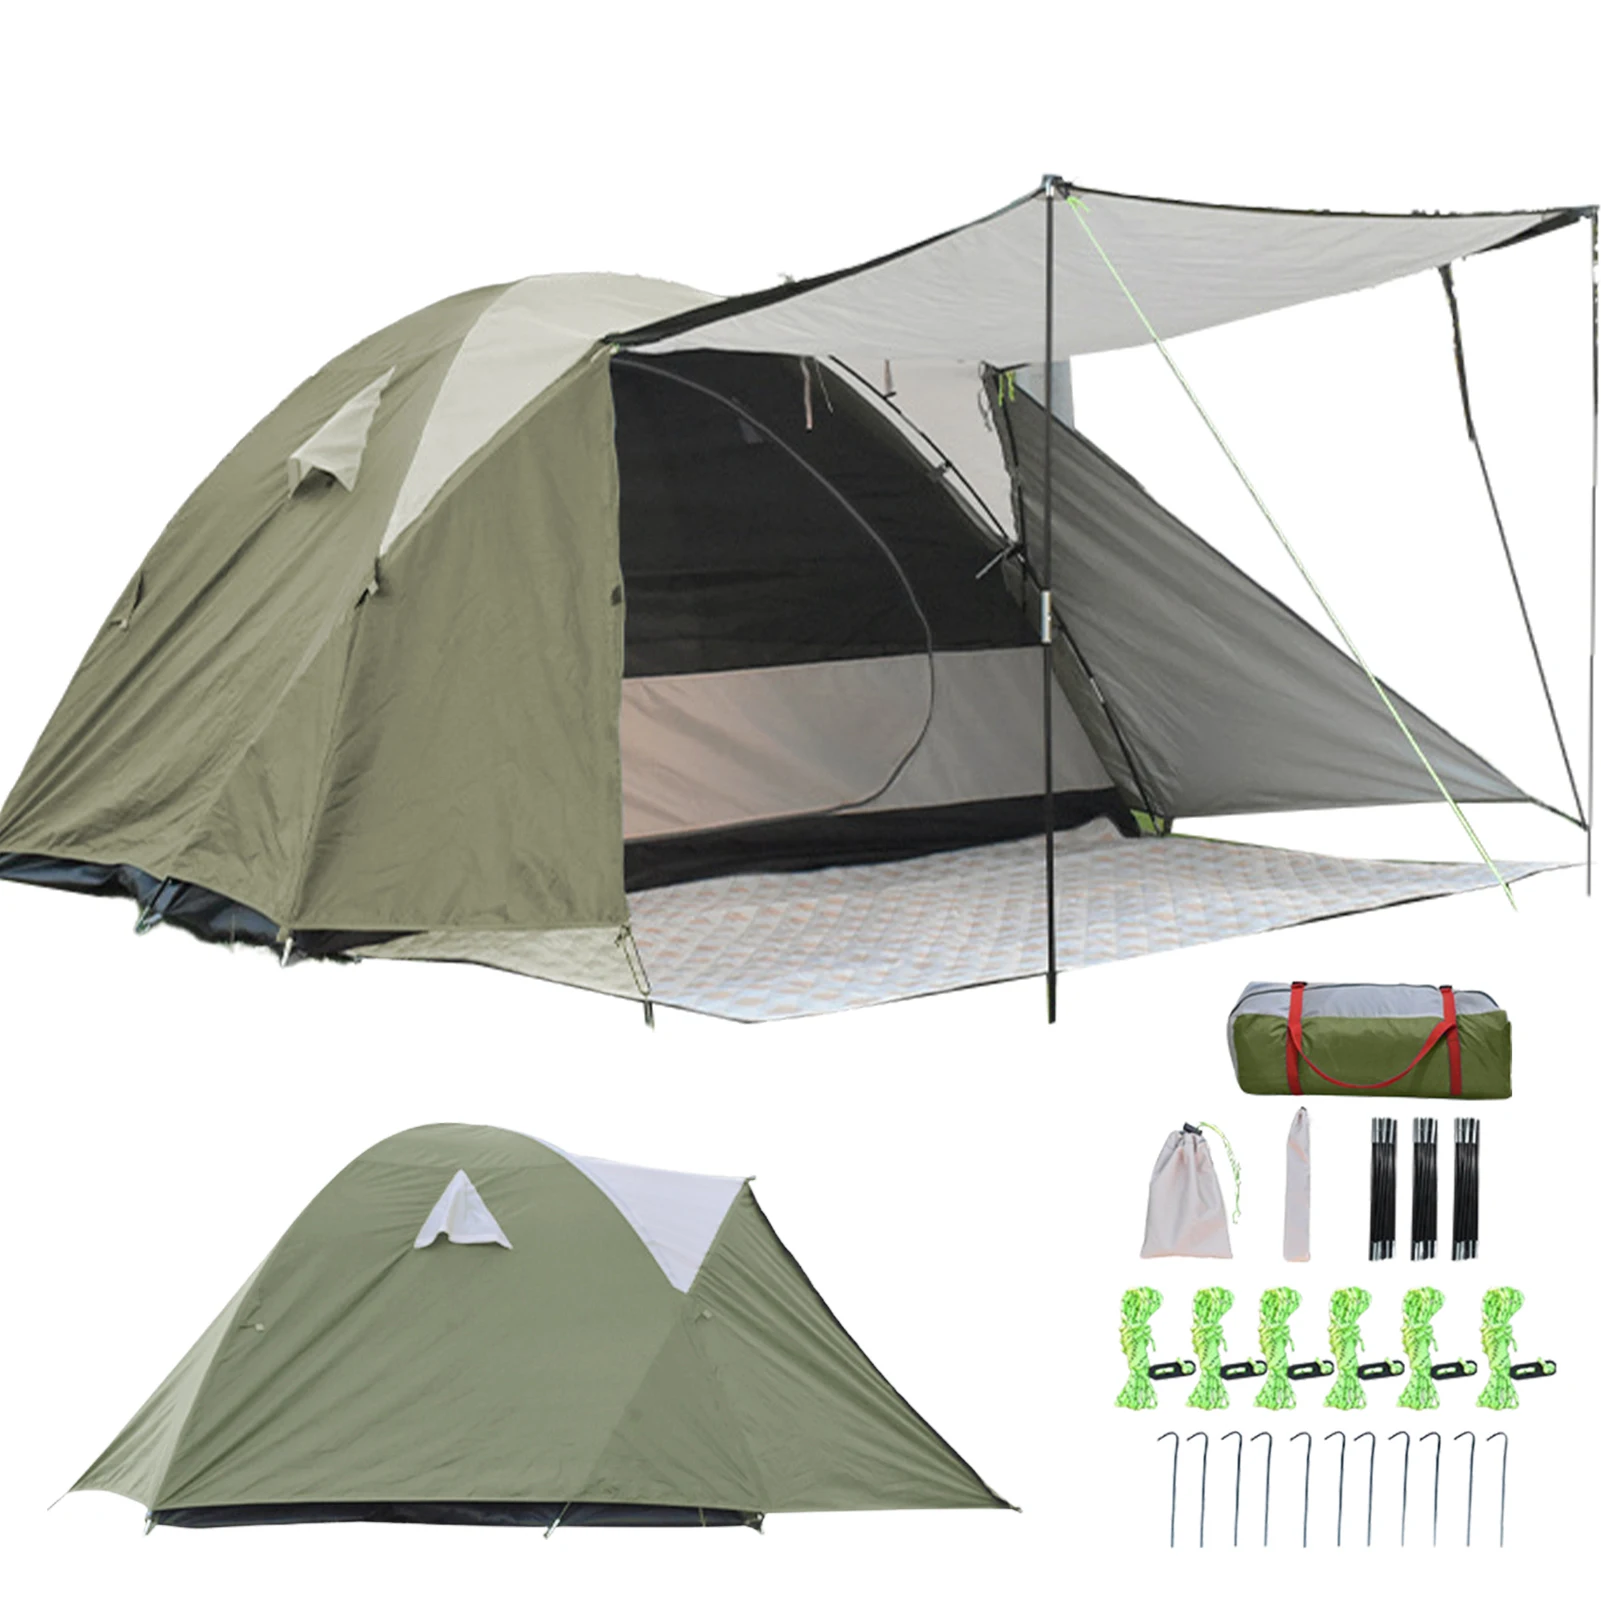 2-3 Person Waterproof Camping Tent Portable Double-Layer Tents Front Hall Design And Breathable Fabric Big Tent Picnic Hiking